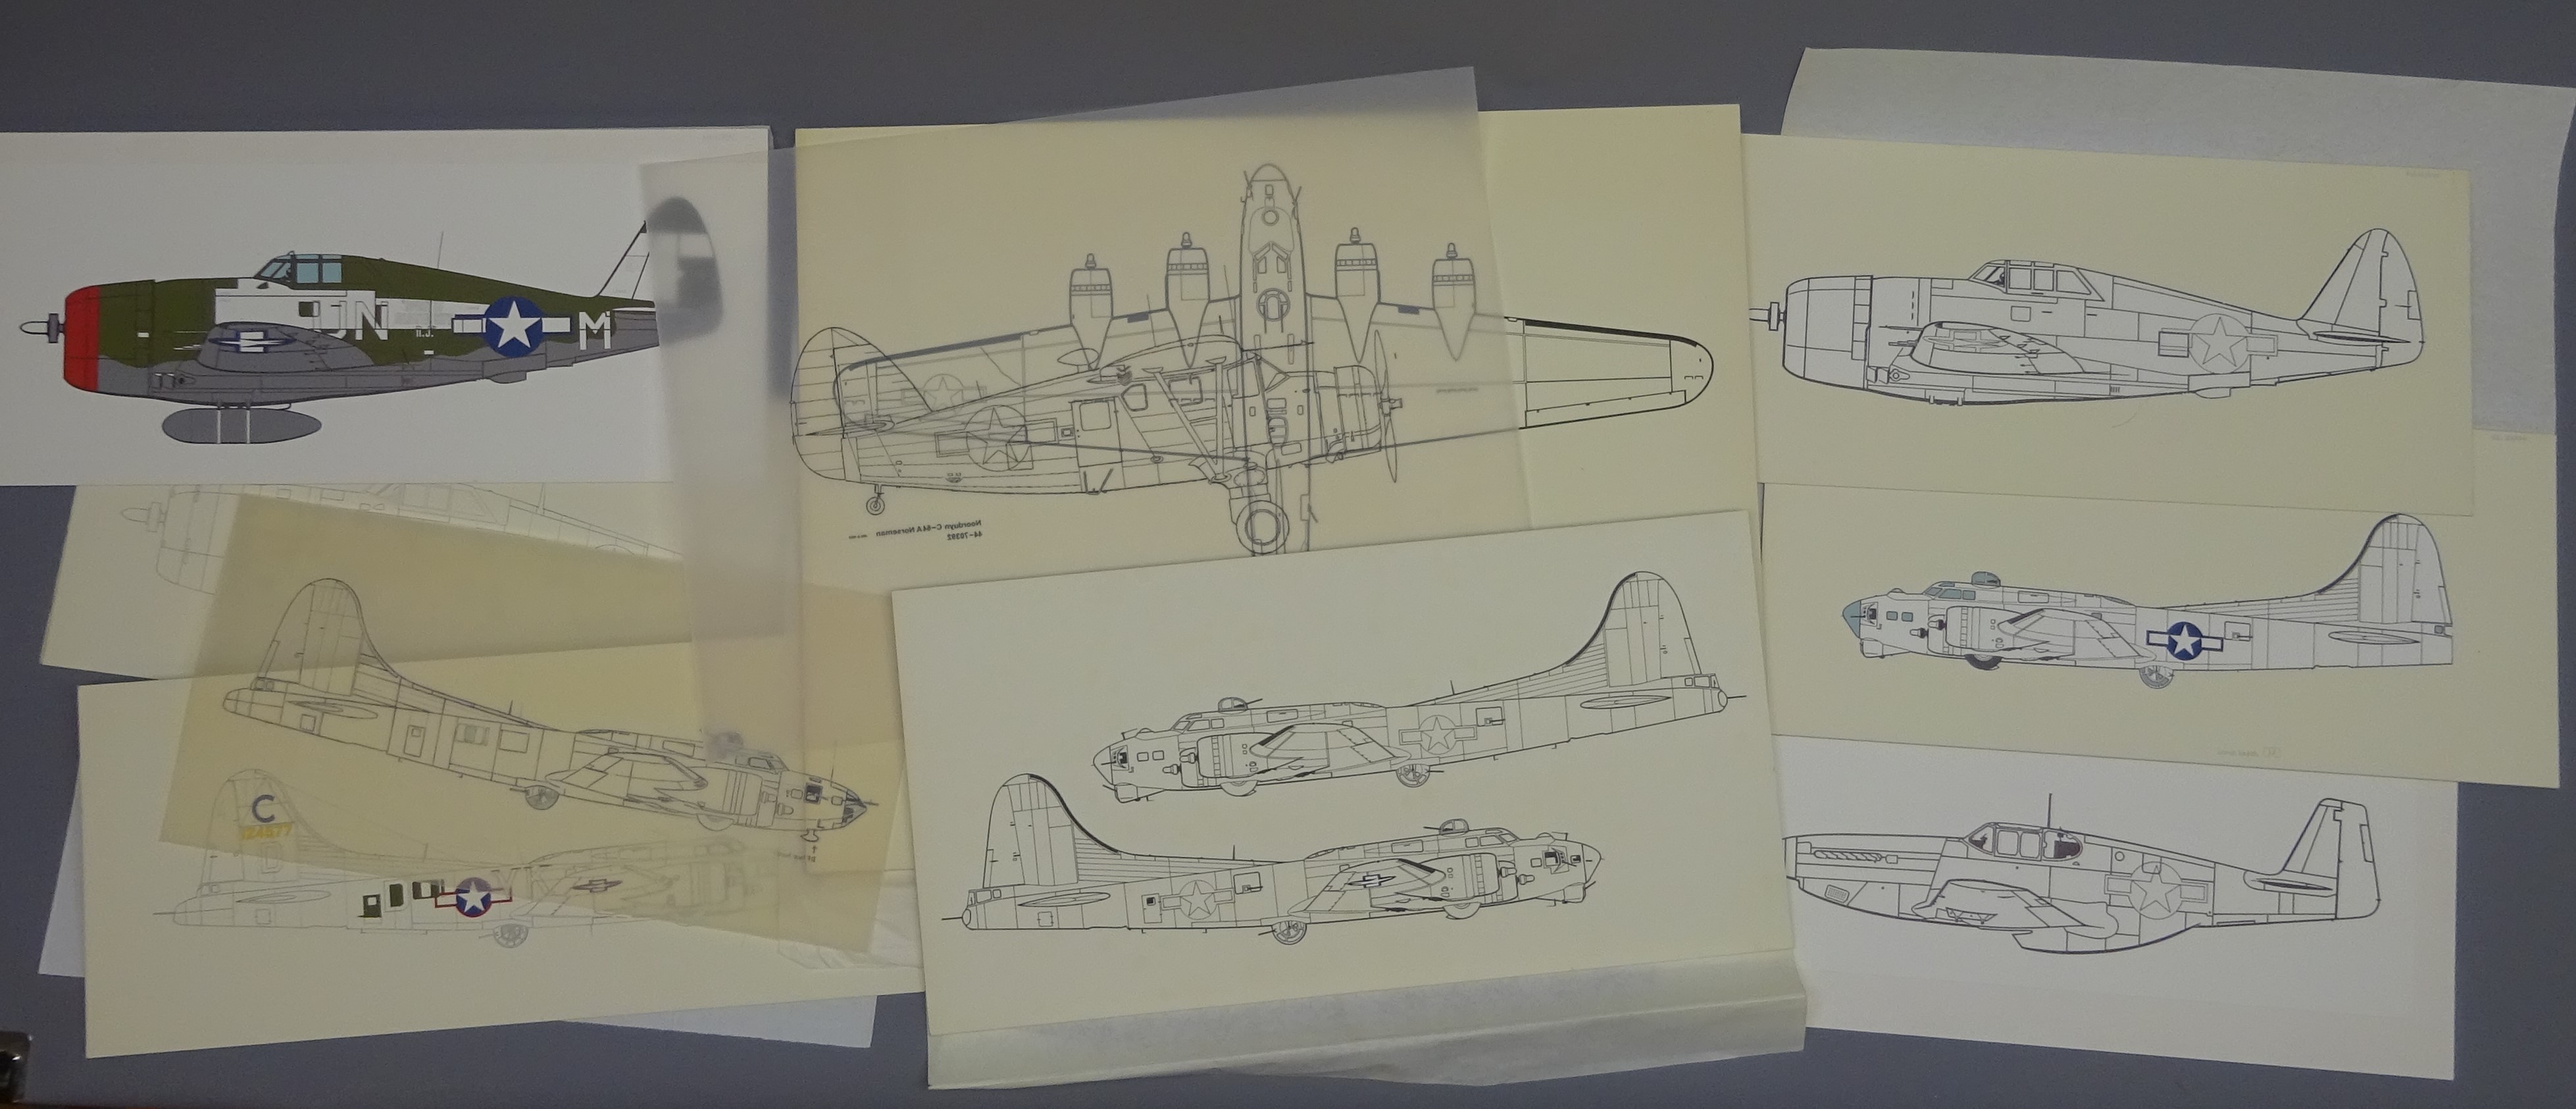 Nine original drawings of American WW2 aircraft produced to illustrate a book on the US Eighth Air